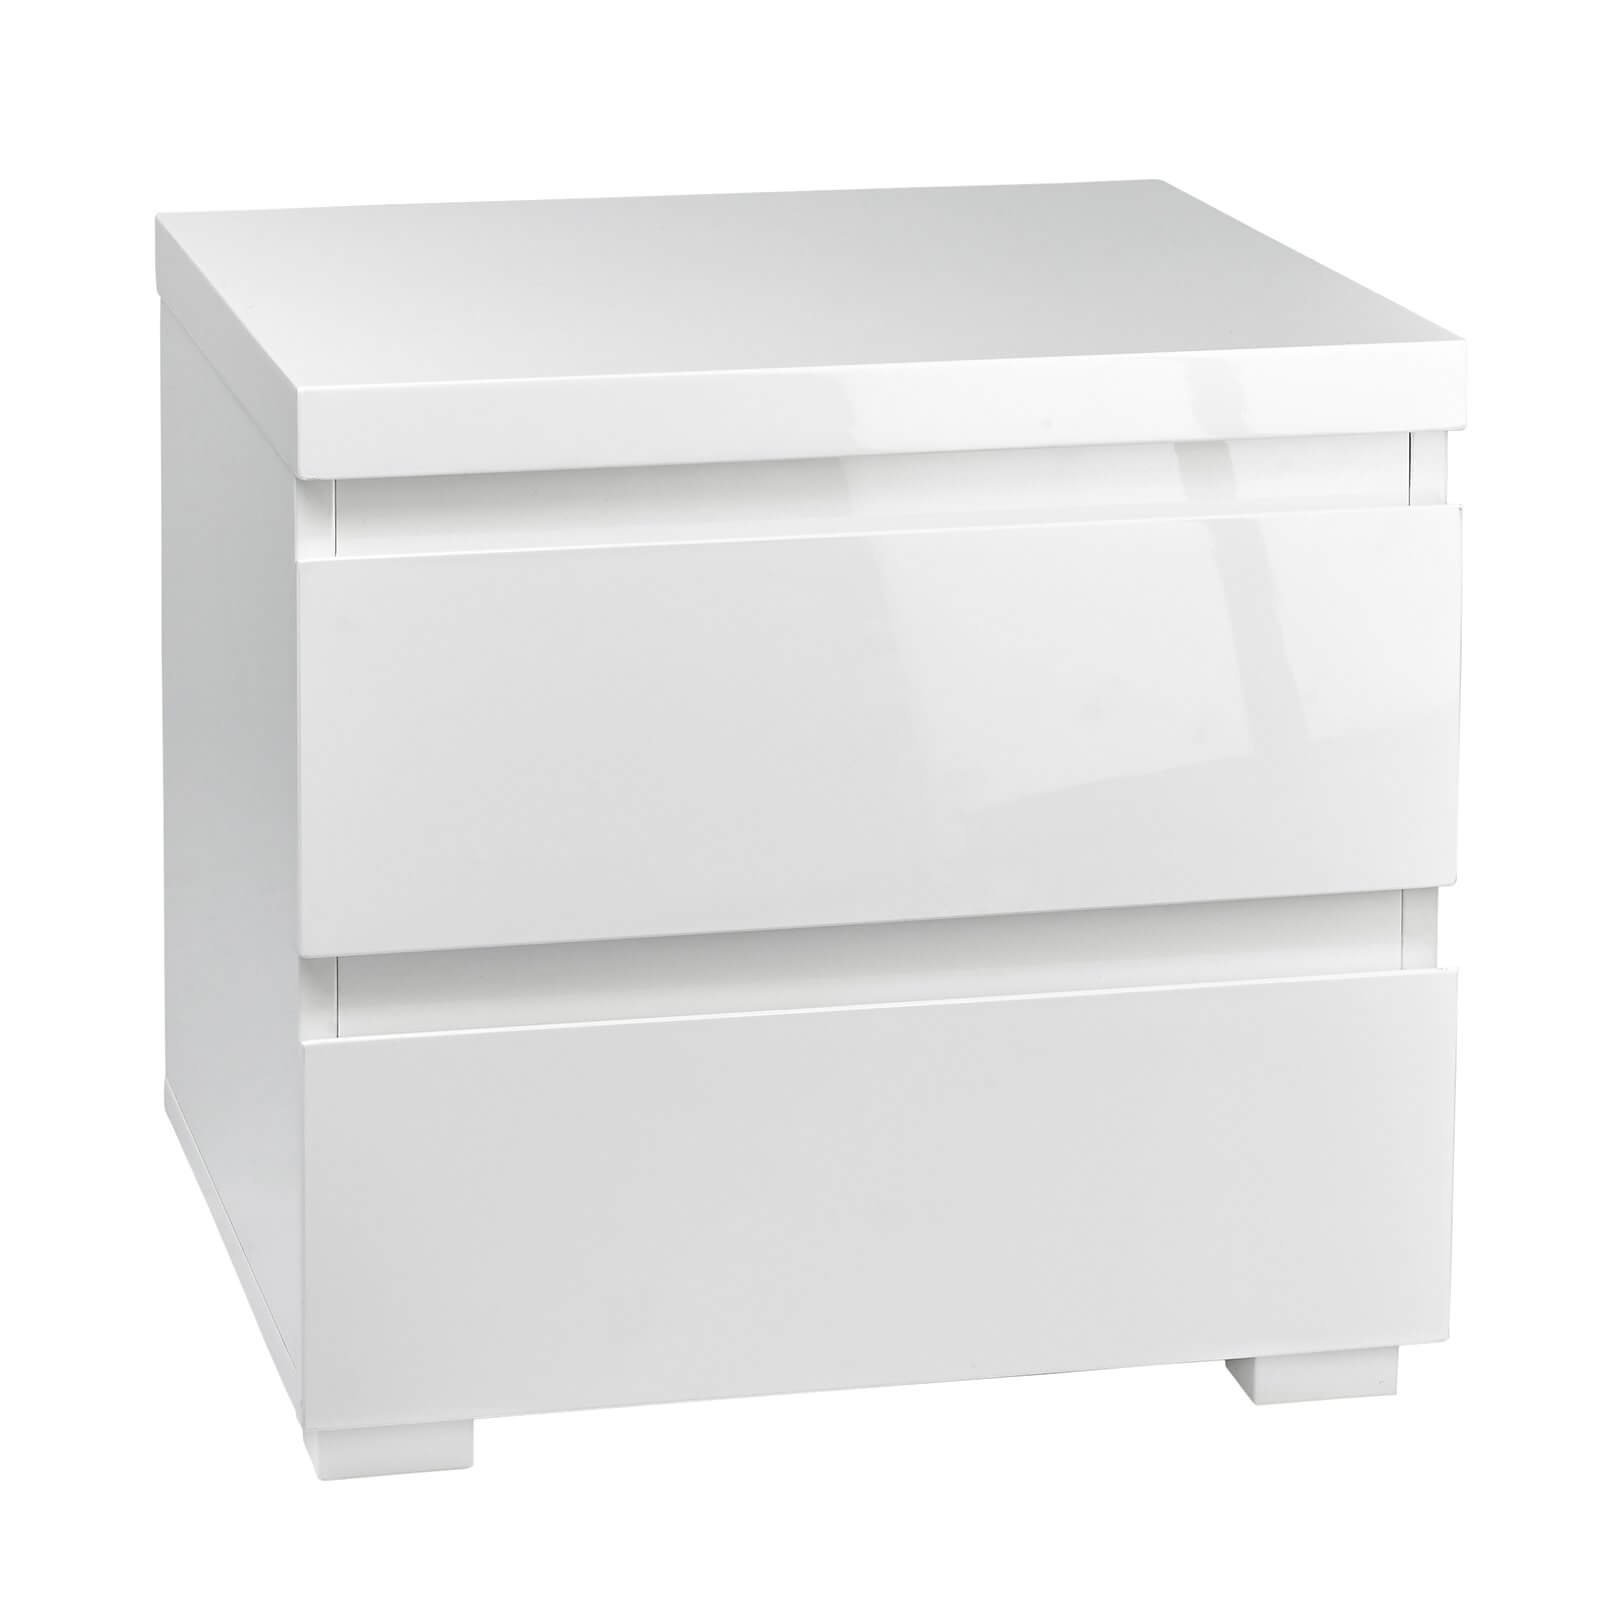 Puro 2 Drawer Bedside Cabinet - White